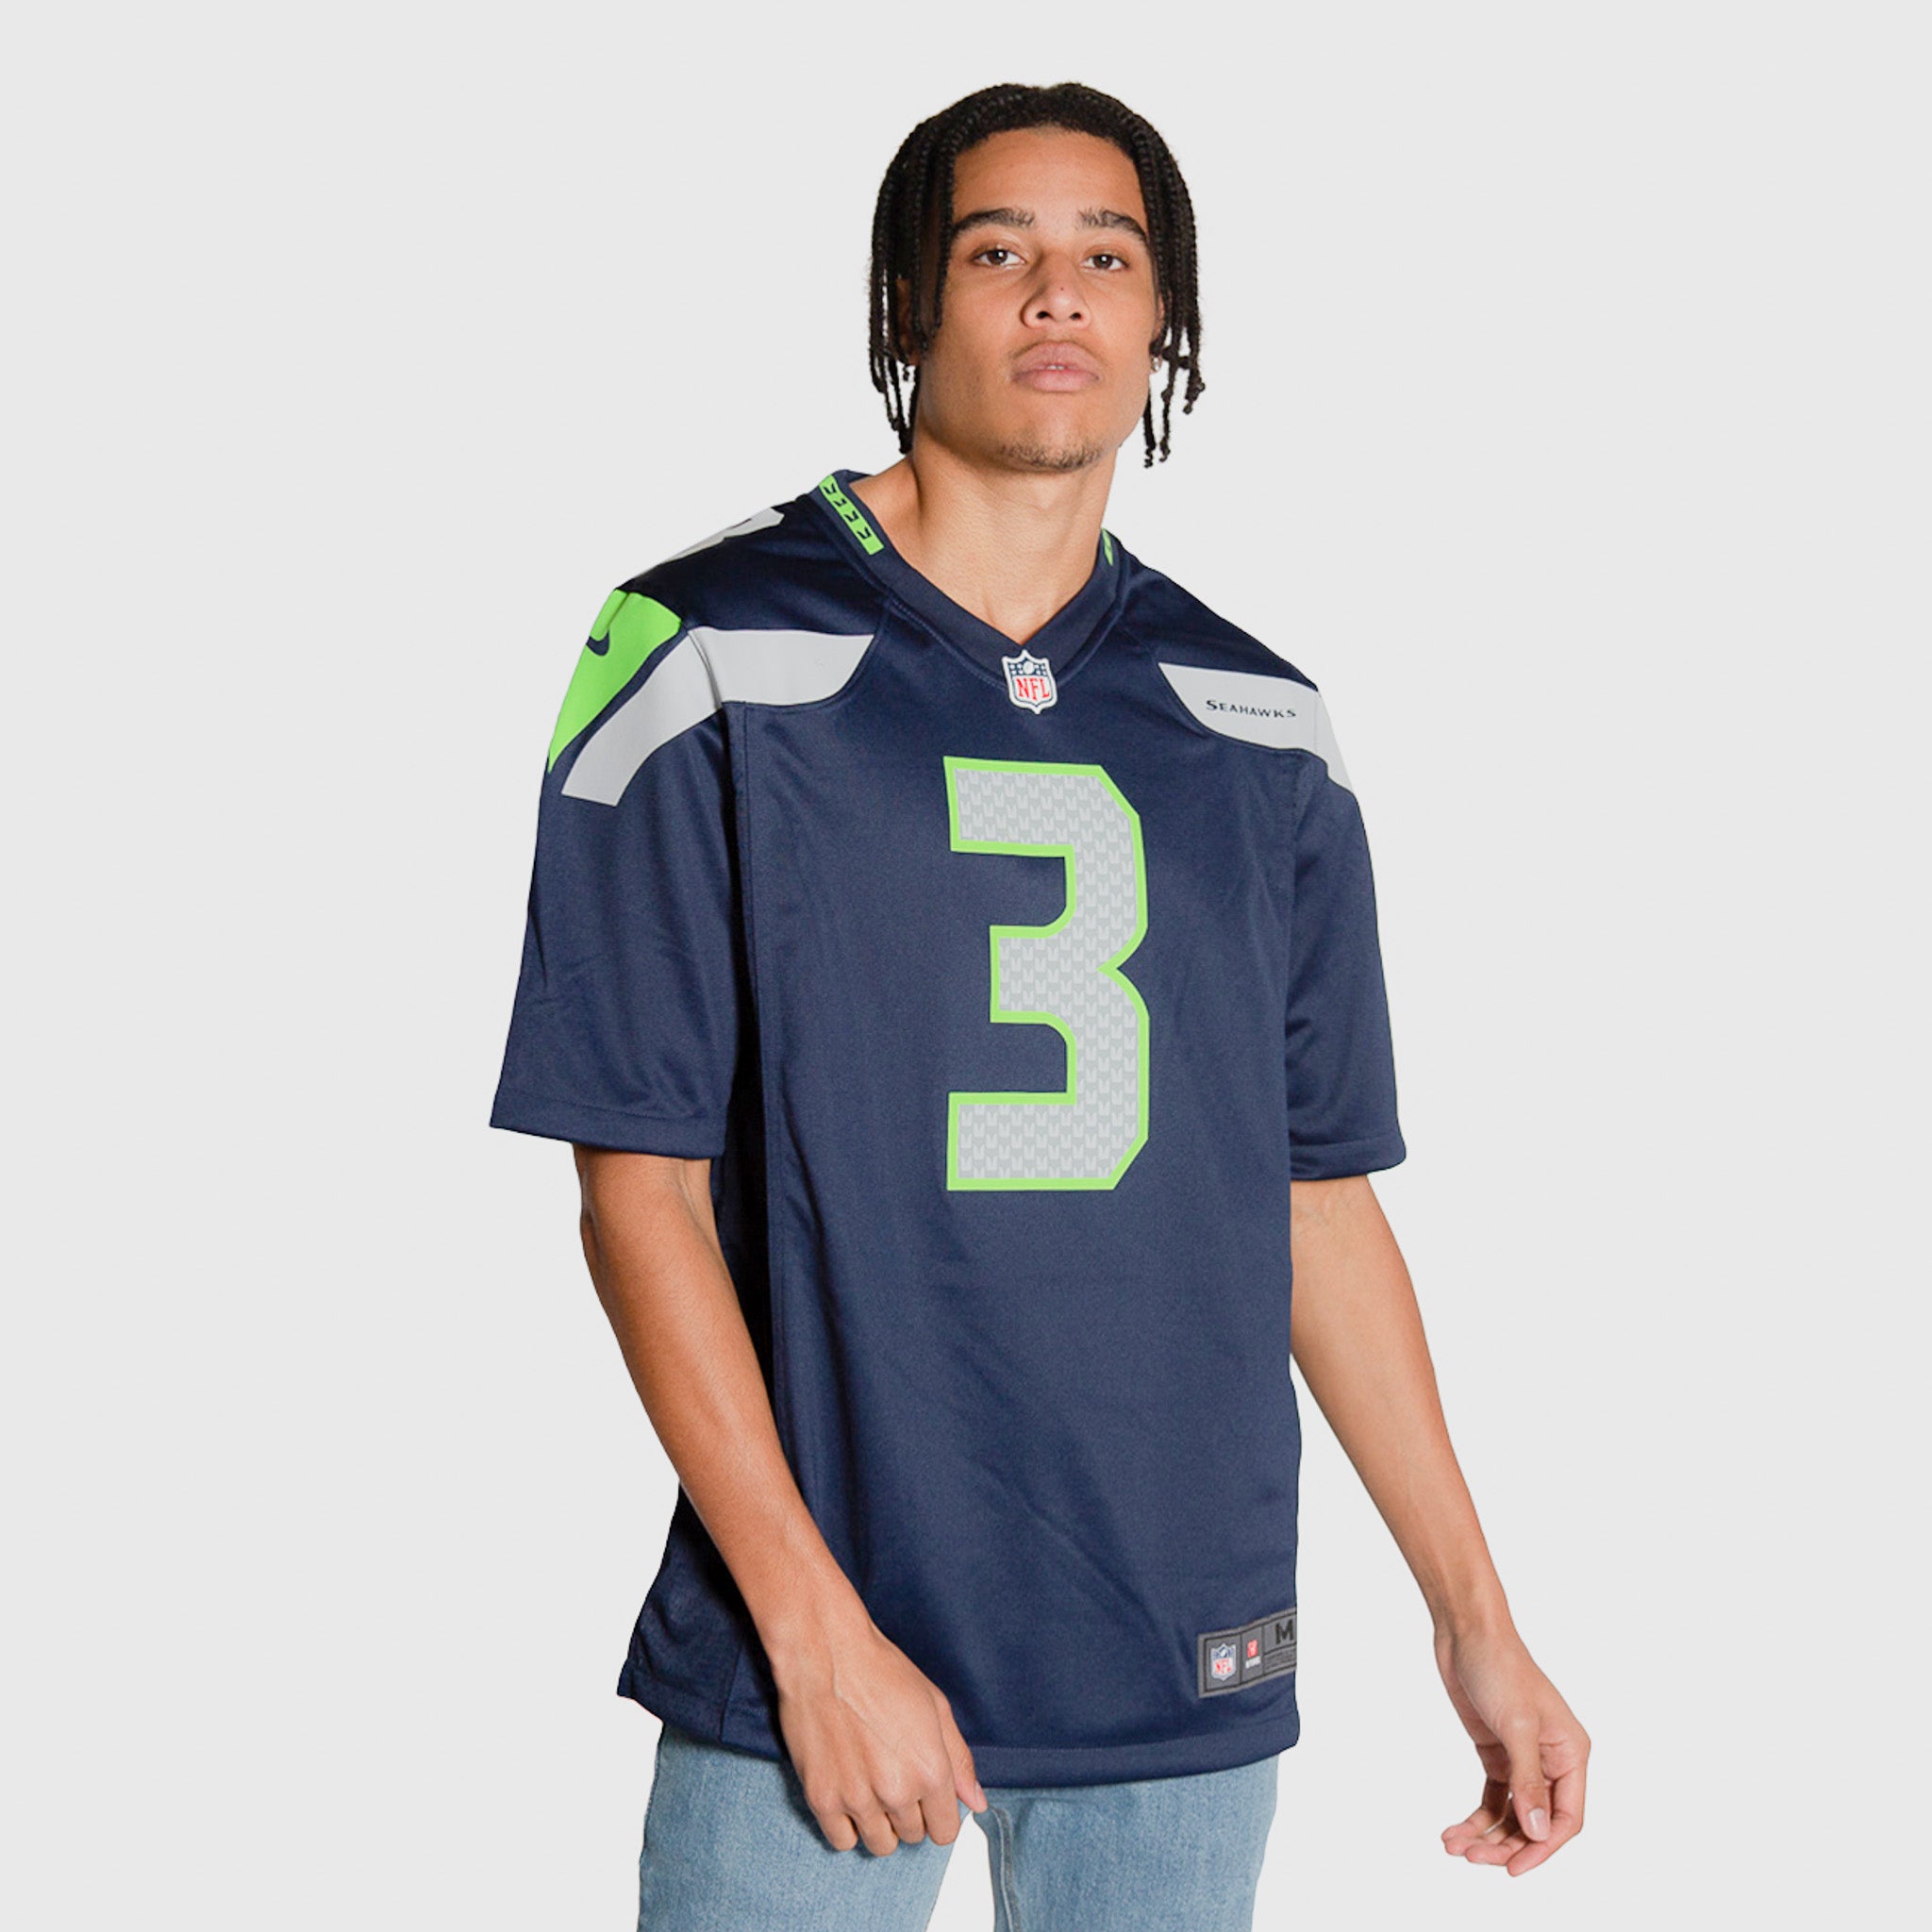  Russell Wilson Seattle Seahawks #3 Youth 8-20 Home